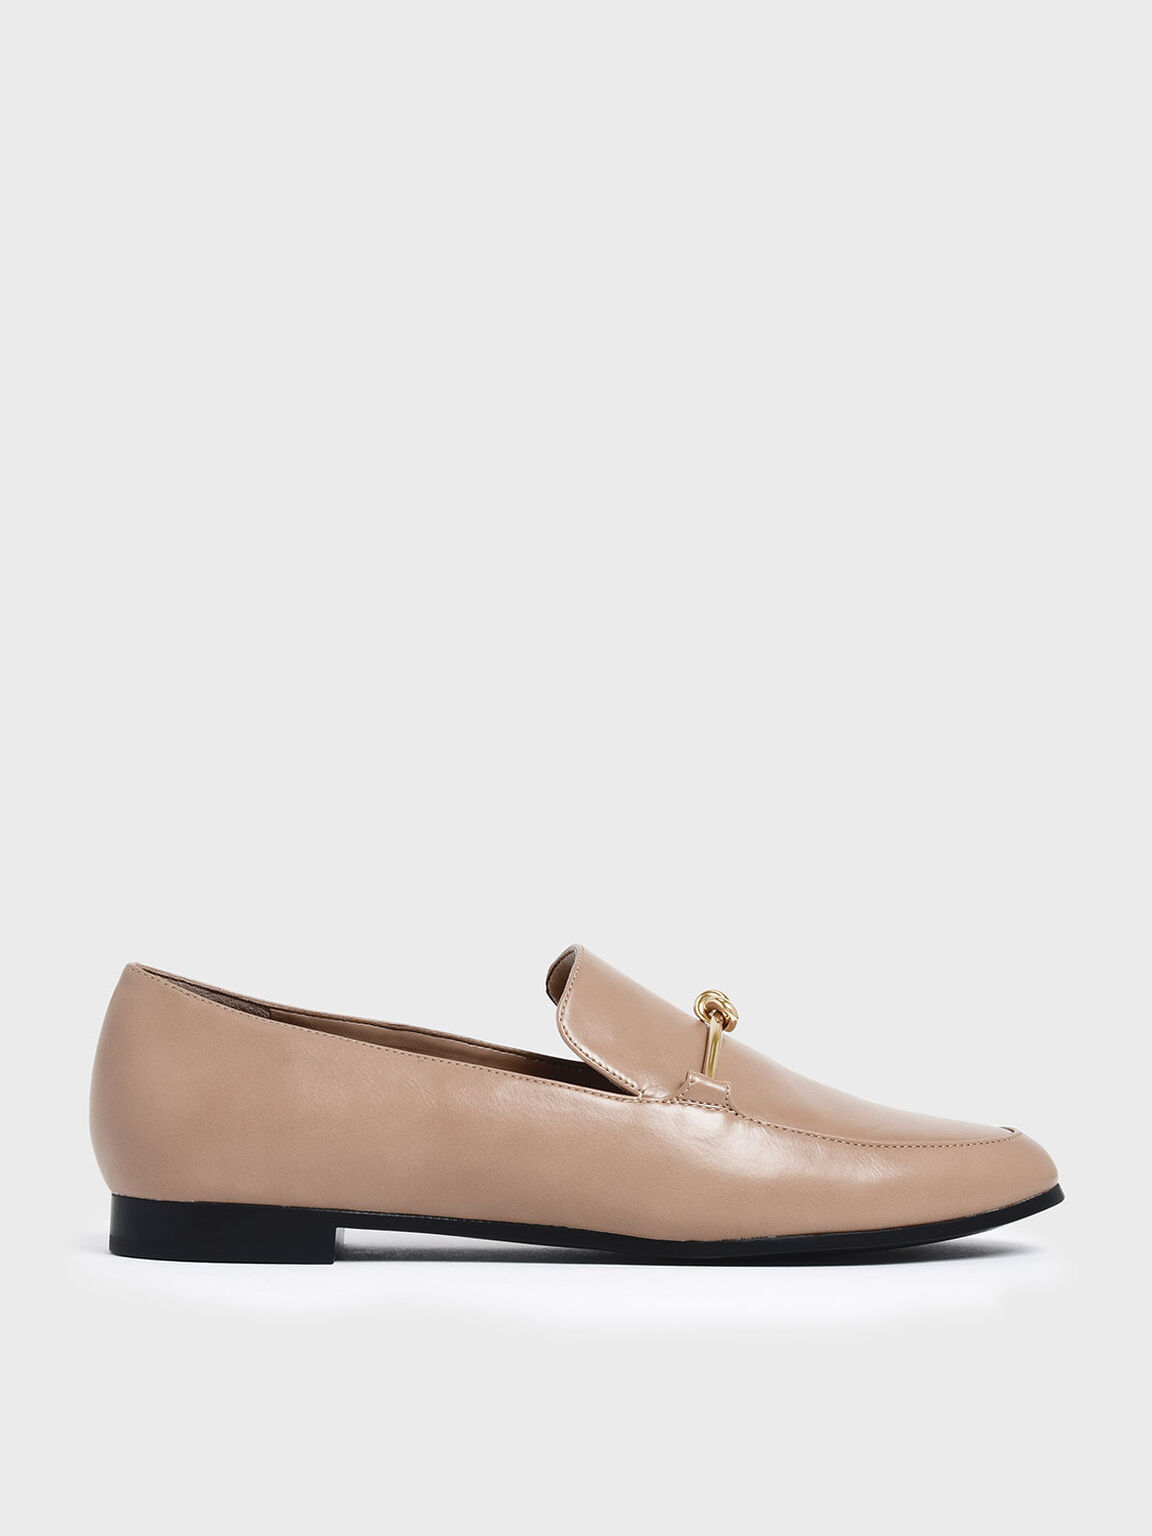 Nude Metallic Knot Accent Loafers - CHARLES & KEITH KR